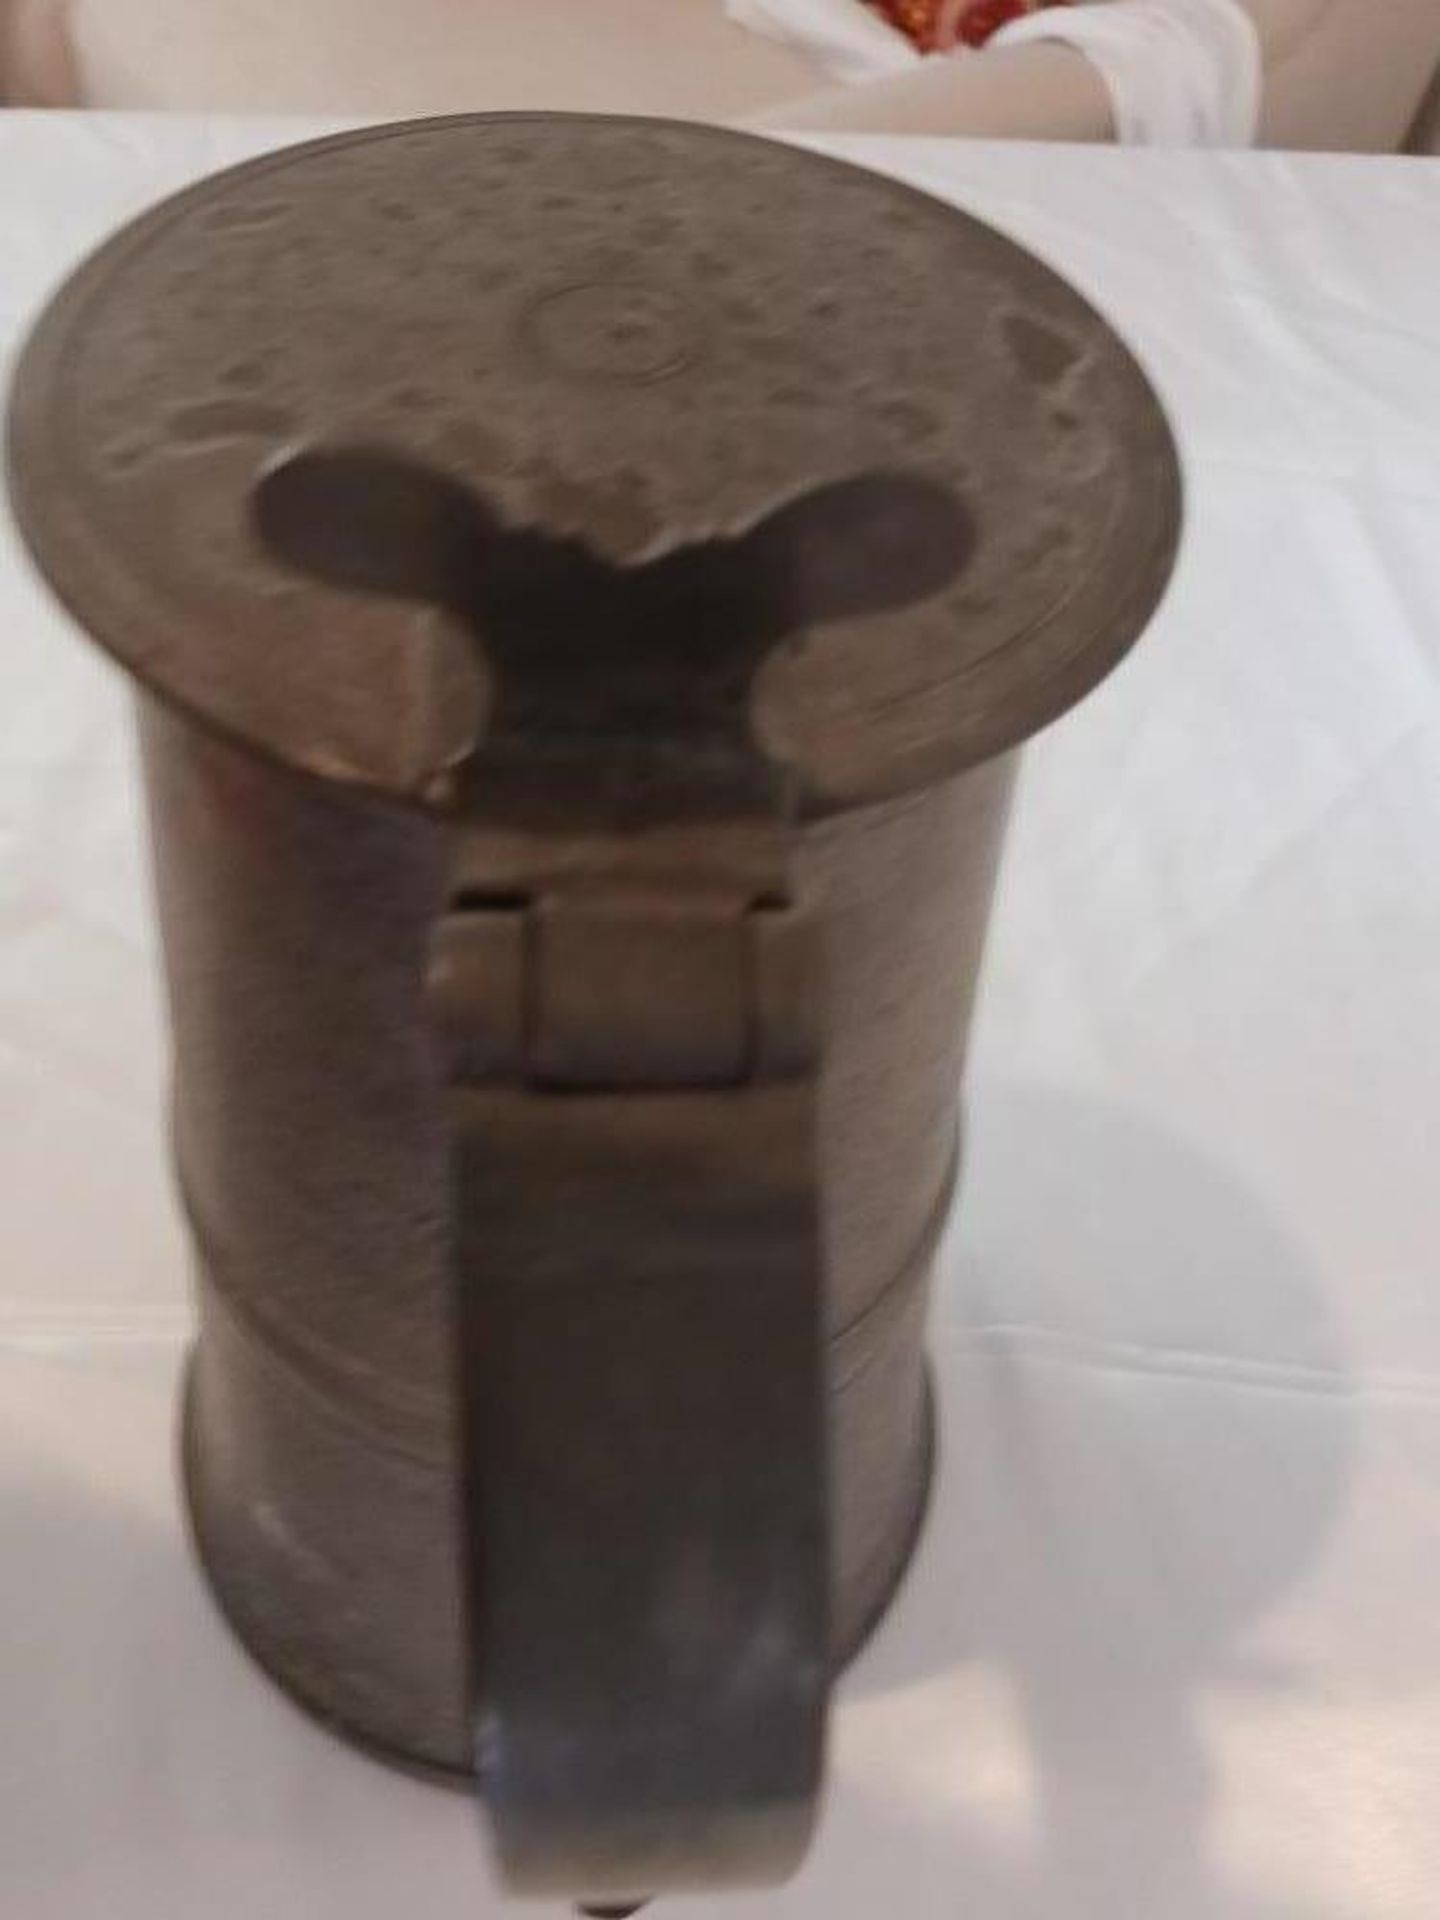 EARLY PEWTER FLAGON W/ ROLLED HANDLE - Image 4 of 7